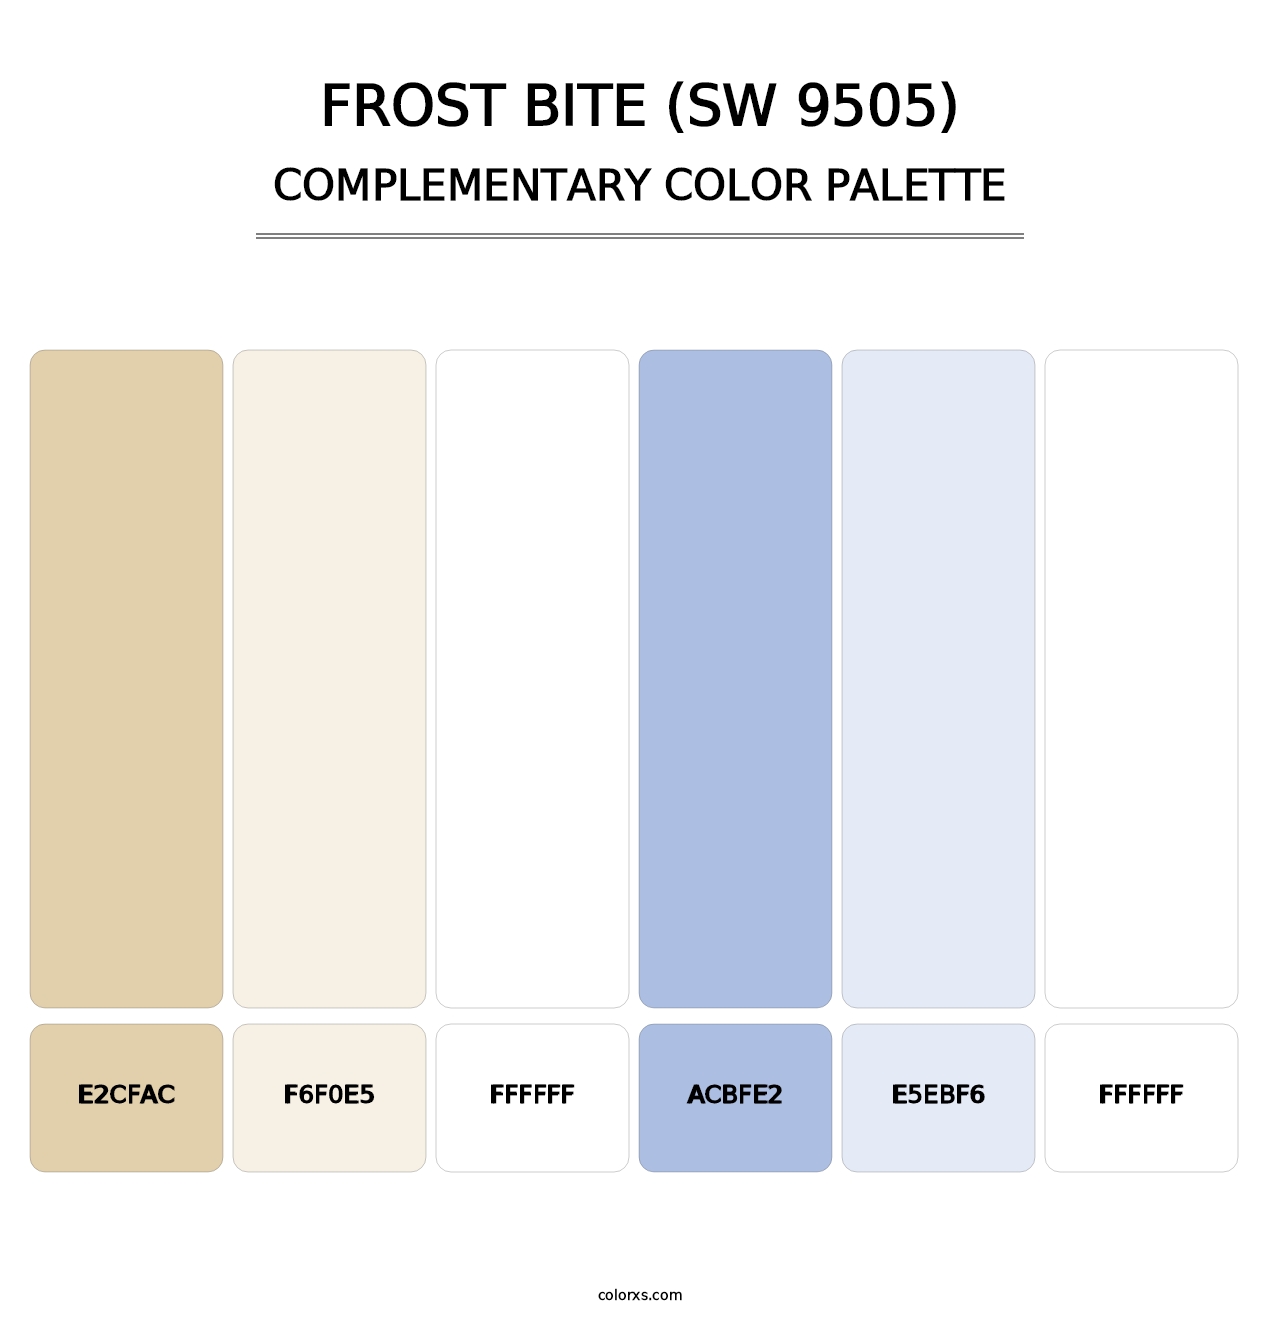 Frost Bite (SW 9505) - Complementary Color Palette